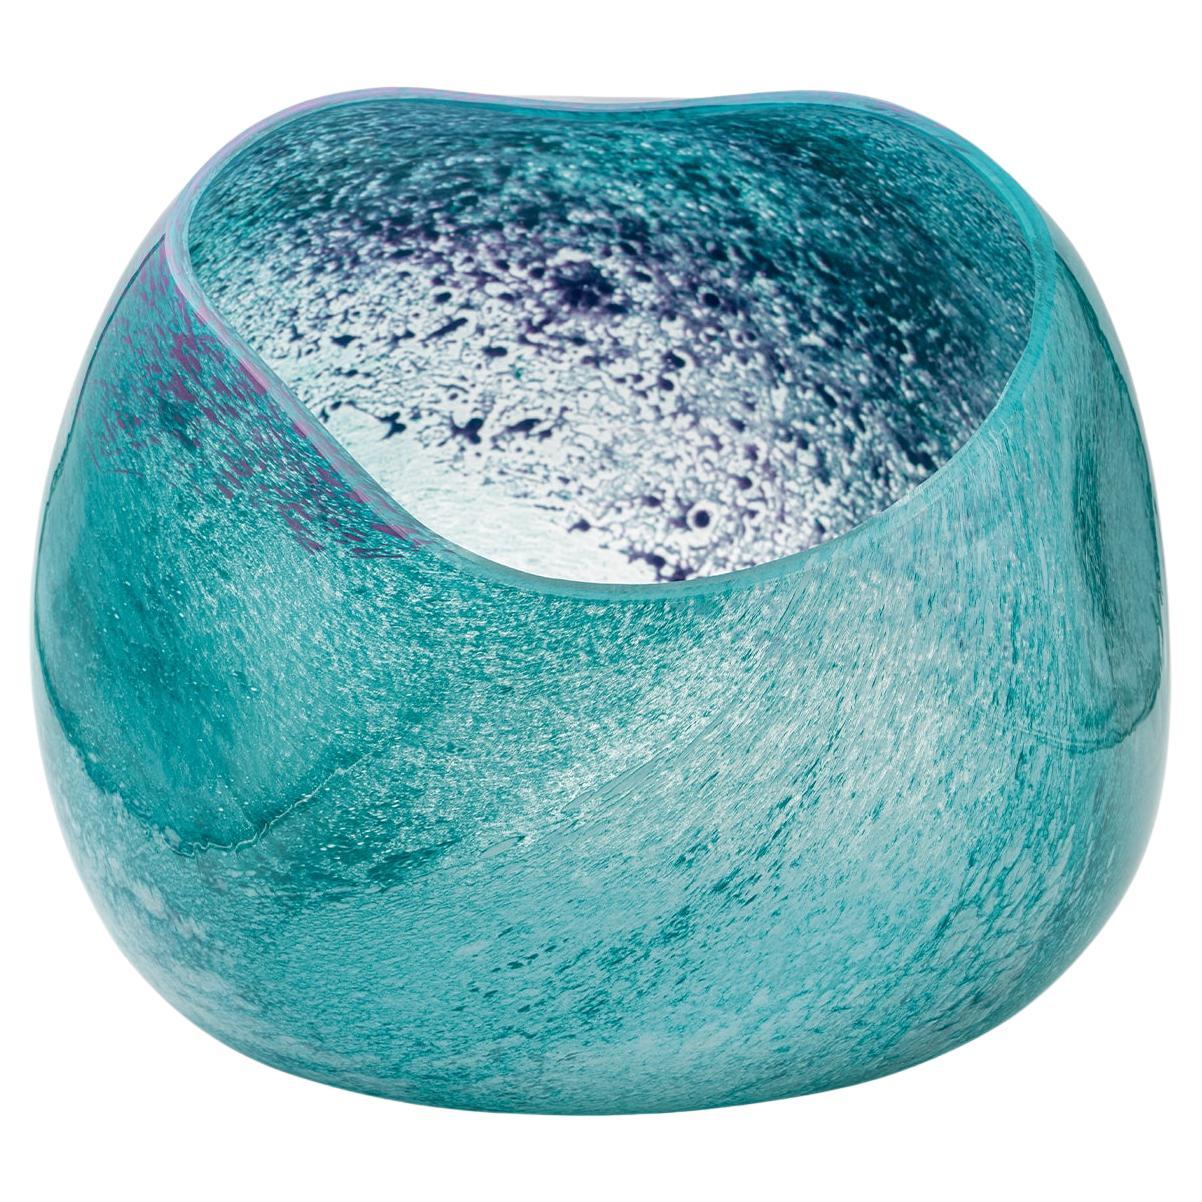 Turquoise and Lilac Color Amorphous Blown Glass Vase No:2